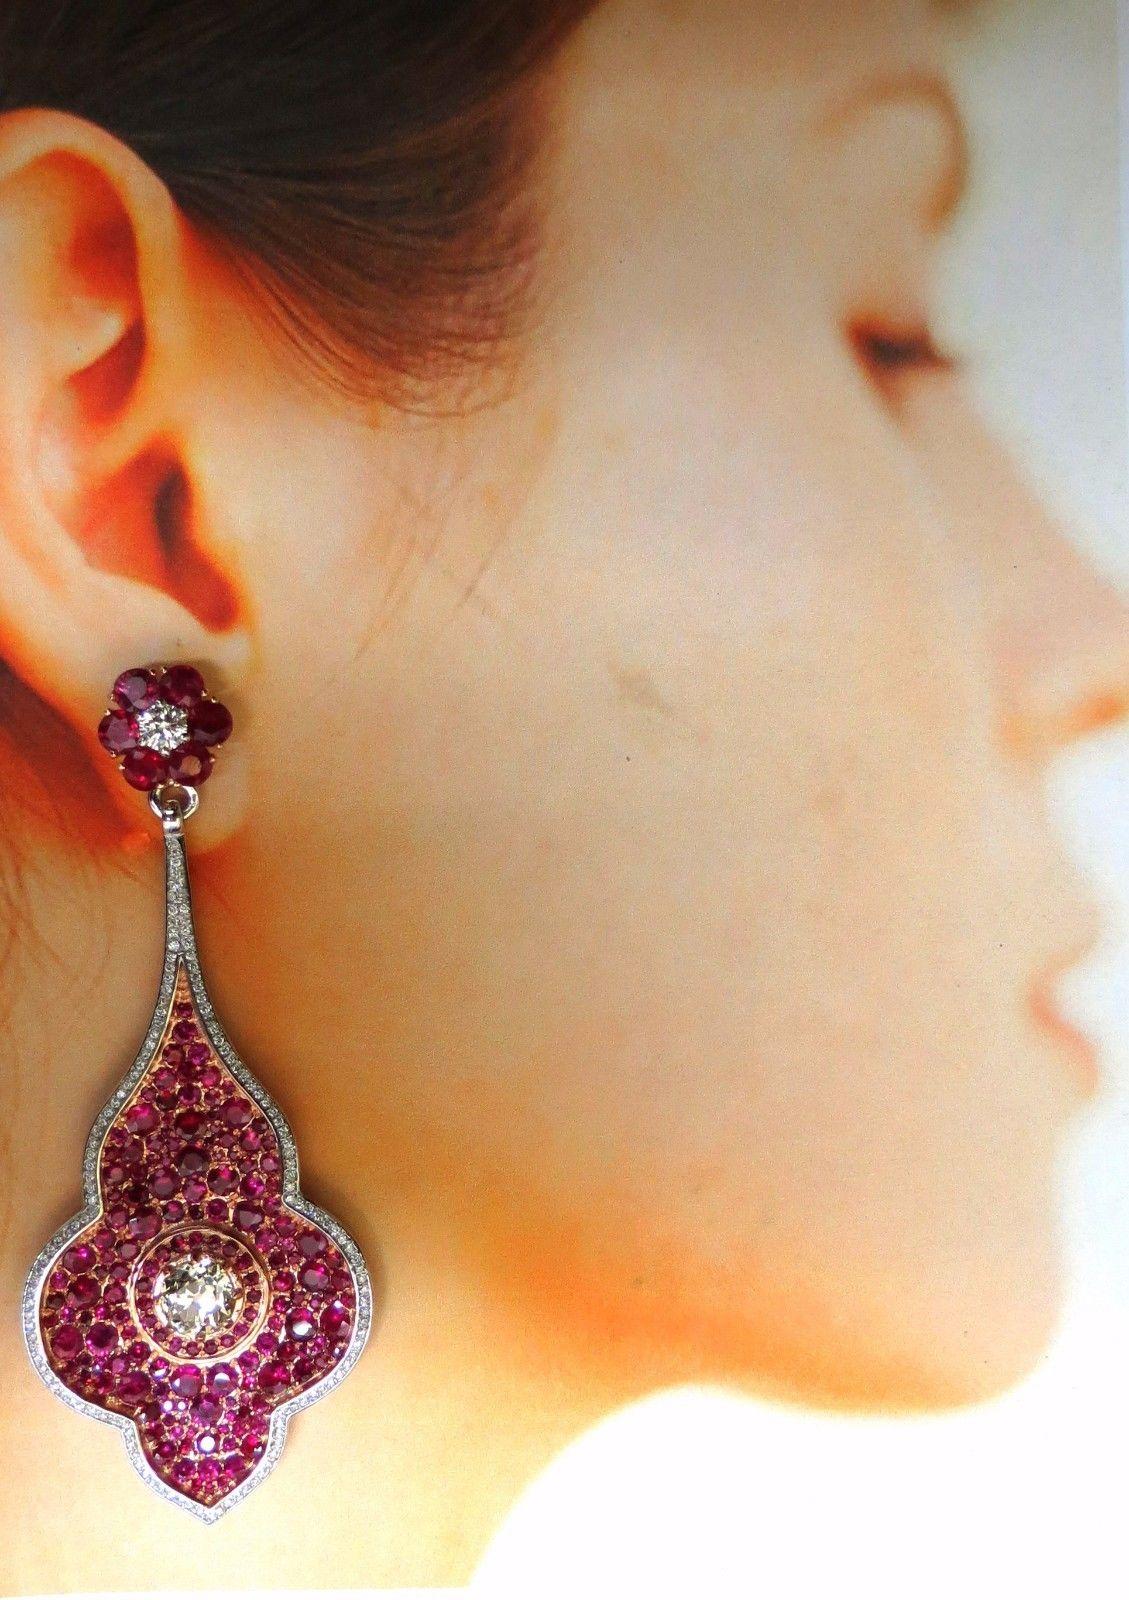 Posh Dangle Premier Elegance.

Ruby Diamonds Cluster & Bead set Dangle Earrings.

6.80ct natural round brilliant rubies (Upper Cluster)

& 22.00ct. smaller bead set Rubies throughout.

Rubies: Rounds , Full Cuts.

Transparent, clean clarity & even